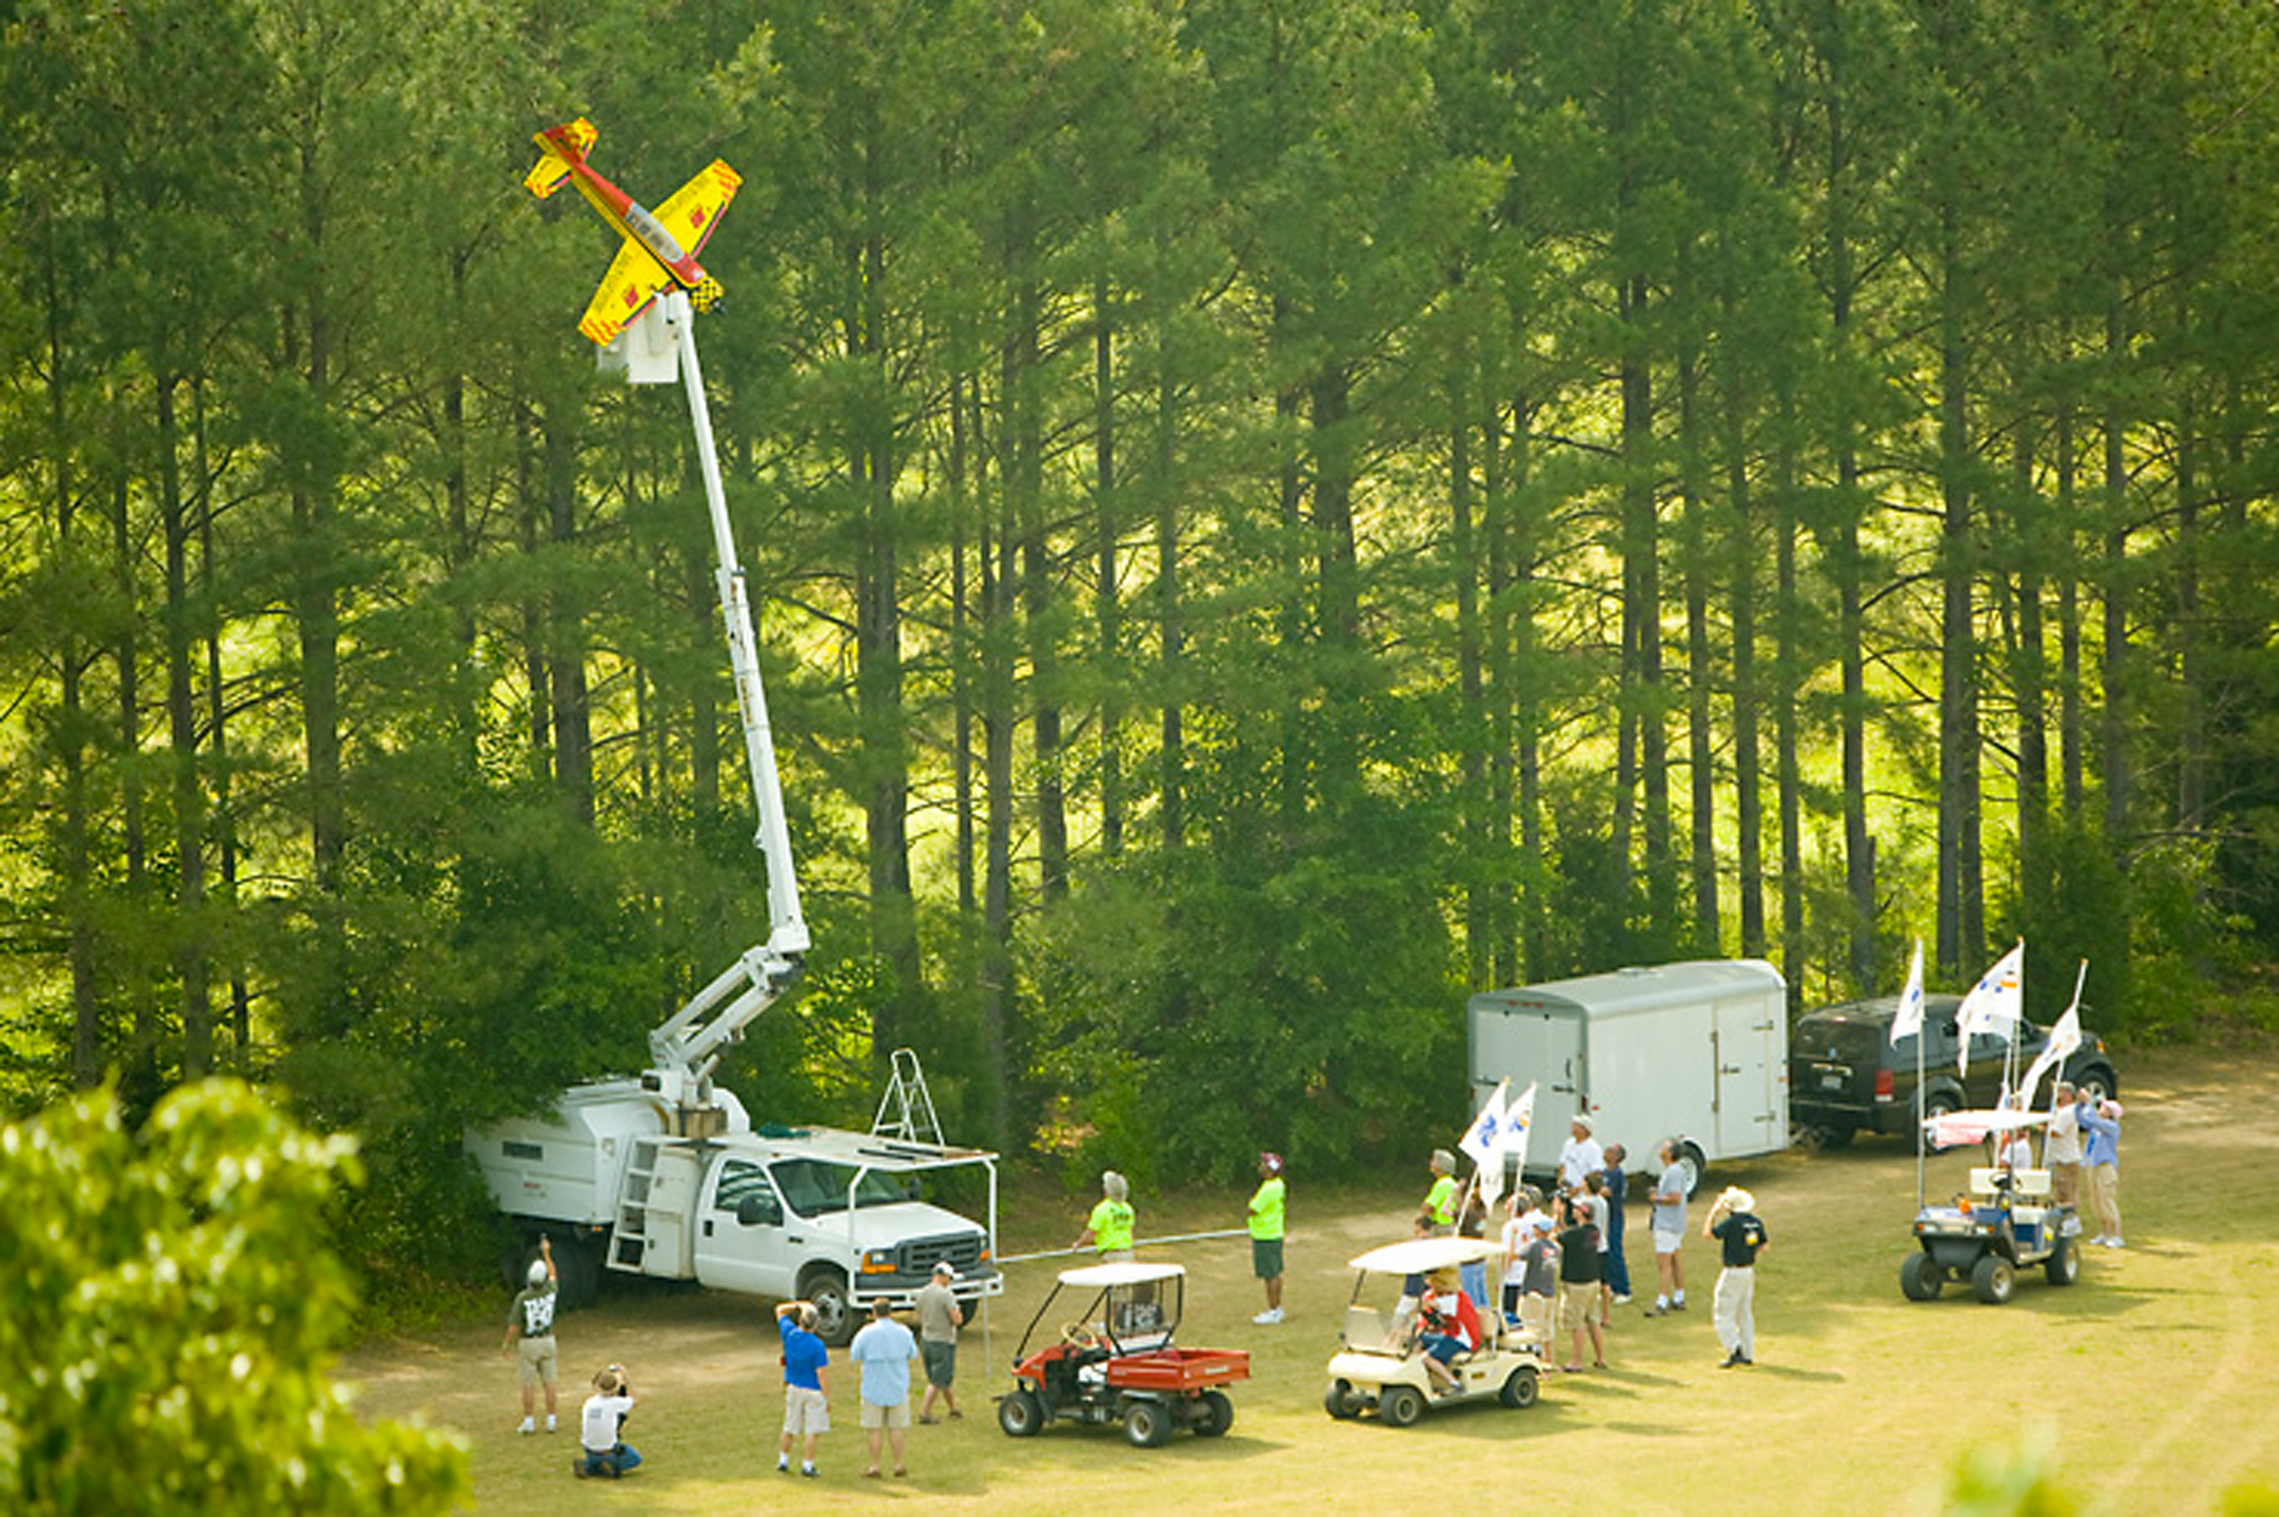 Getting airplanes out of trees is an art form at Triple Tree. The author was present for this airplane extrication.